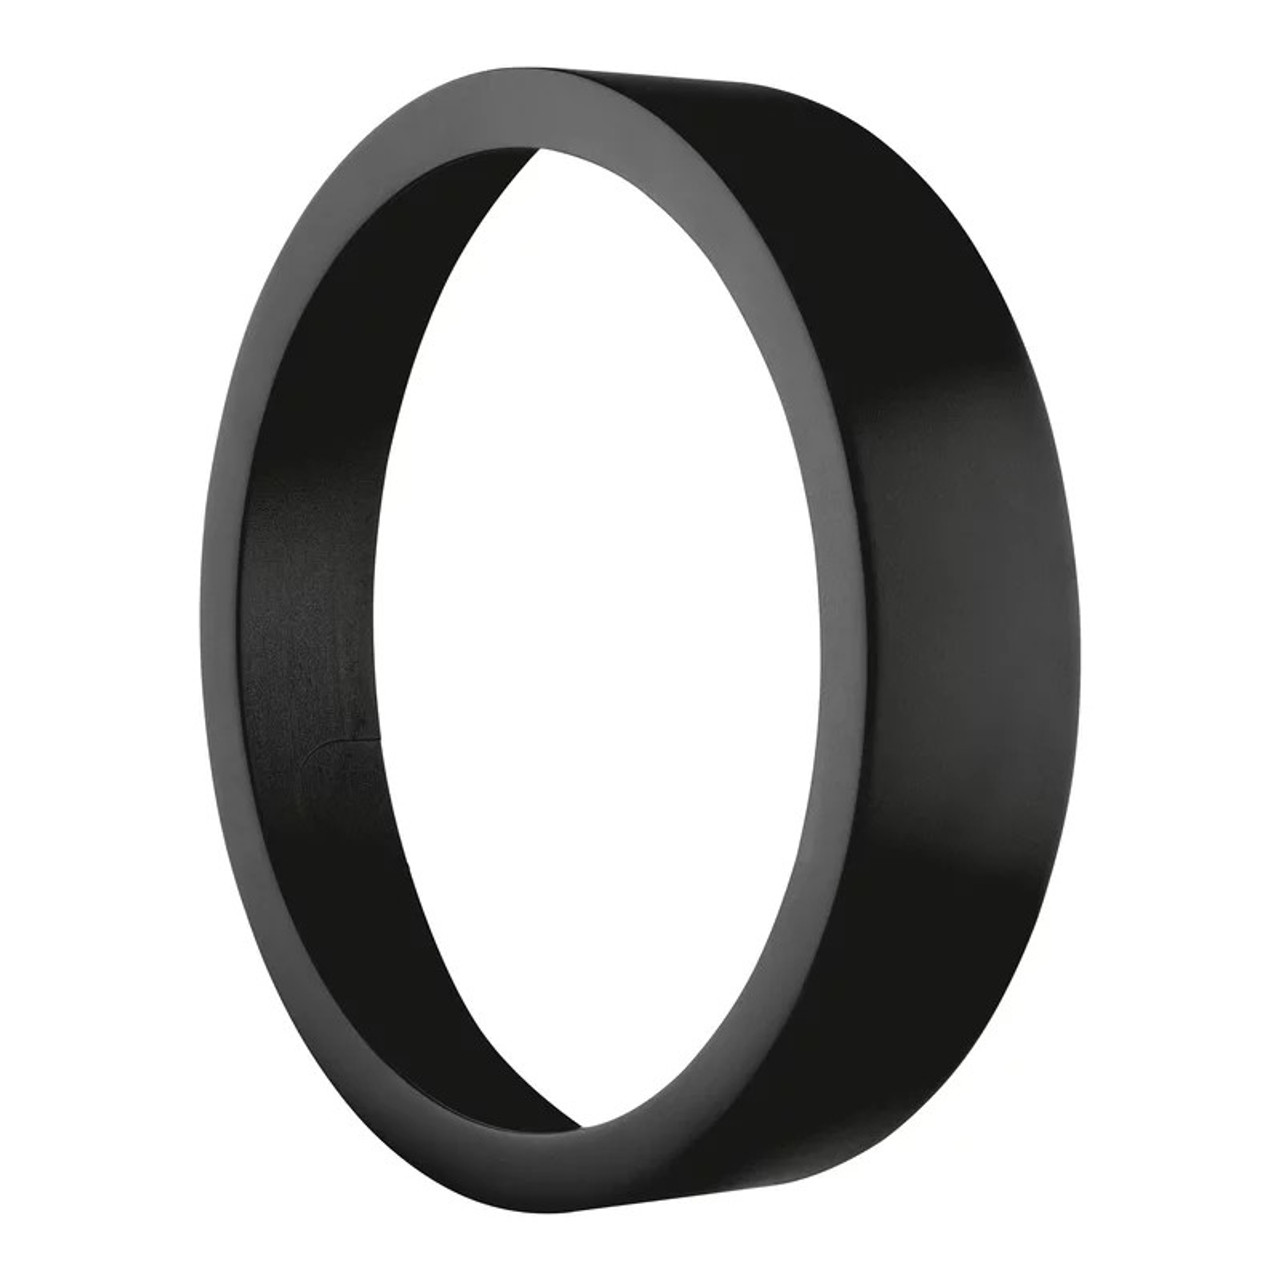 Black Attachable Cover Ring for 300mm Bulkhead